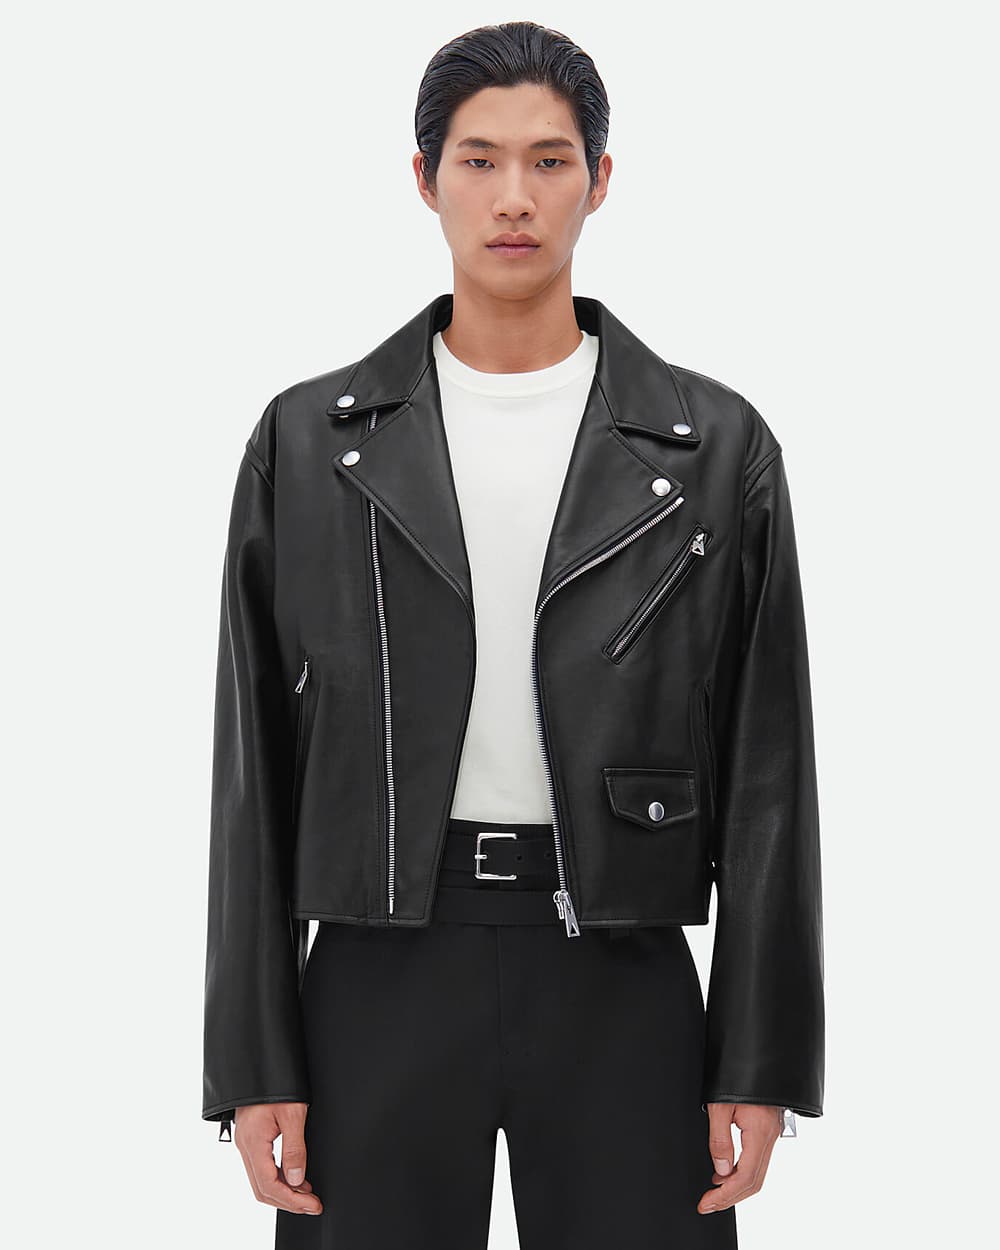 Asian man wearing black leather biker jacket by Bottega Veneta with a white T-shirt and black belted pants